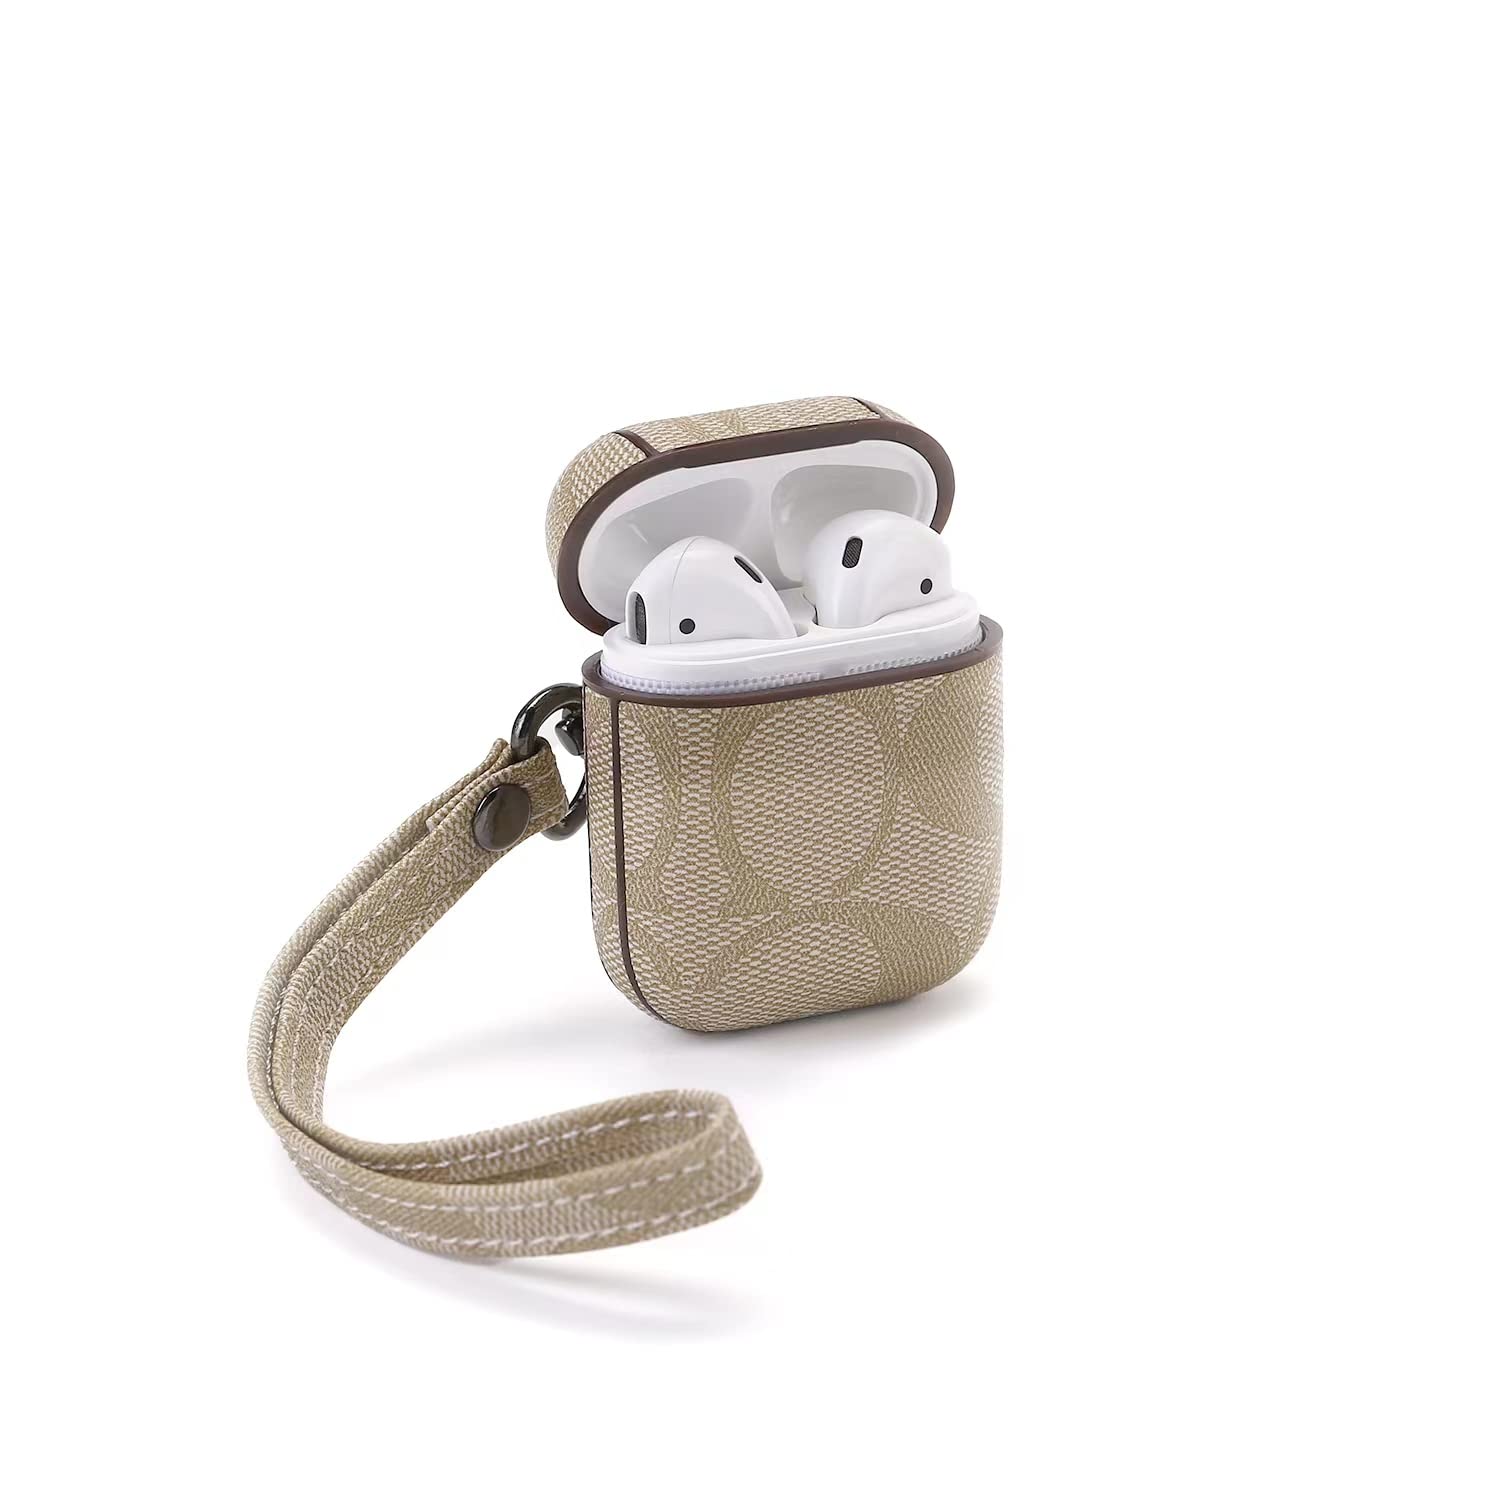 Designer Luxury Leather Elegant Airpods Case with Keychain for Airpods 2/1  Fully Protective Case for Airpods Accessories Gifts for Women Girls : Buy  Online at Best Price in KSA - Souq is